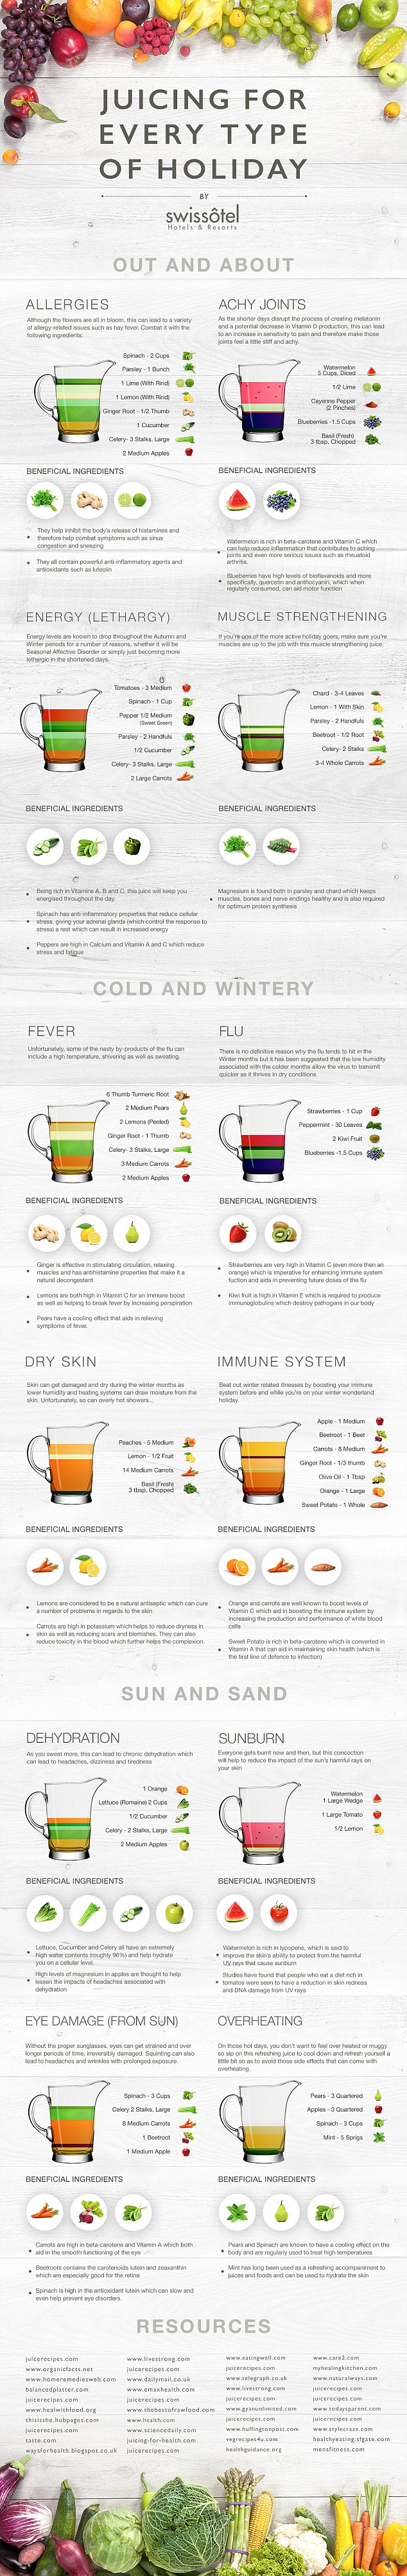 juicing for every type of holiday